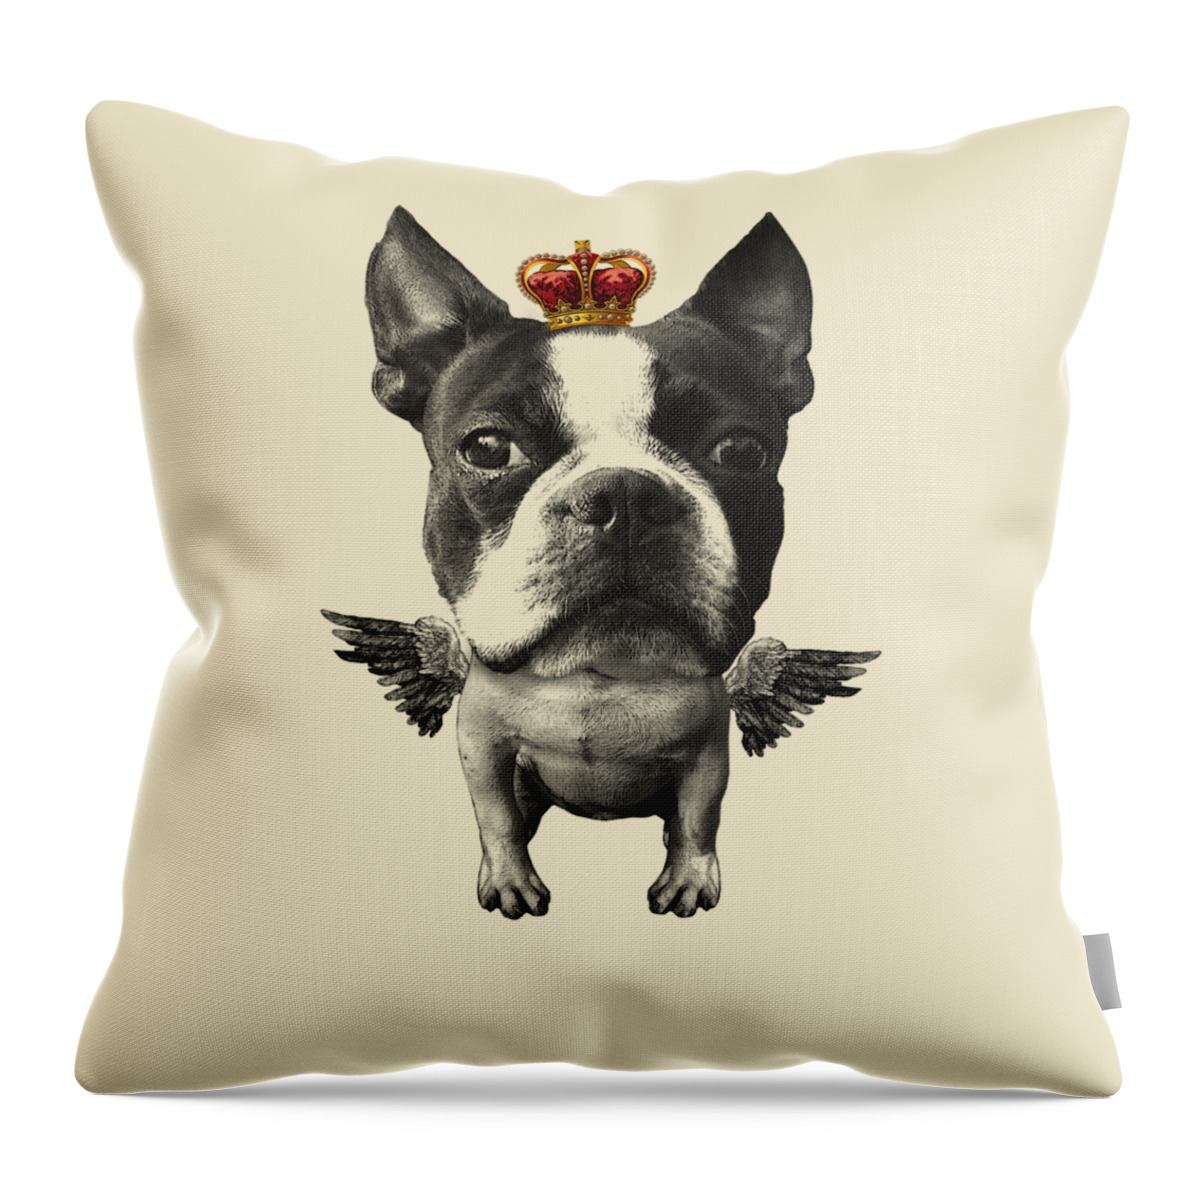 Dog Breed Throw Pillow featuring the digital art Boston Terrier, The King by Madame Memento